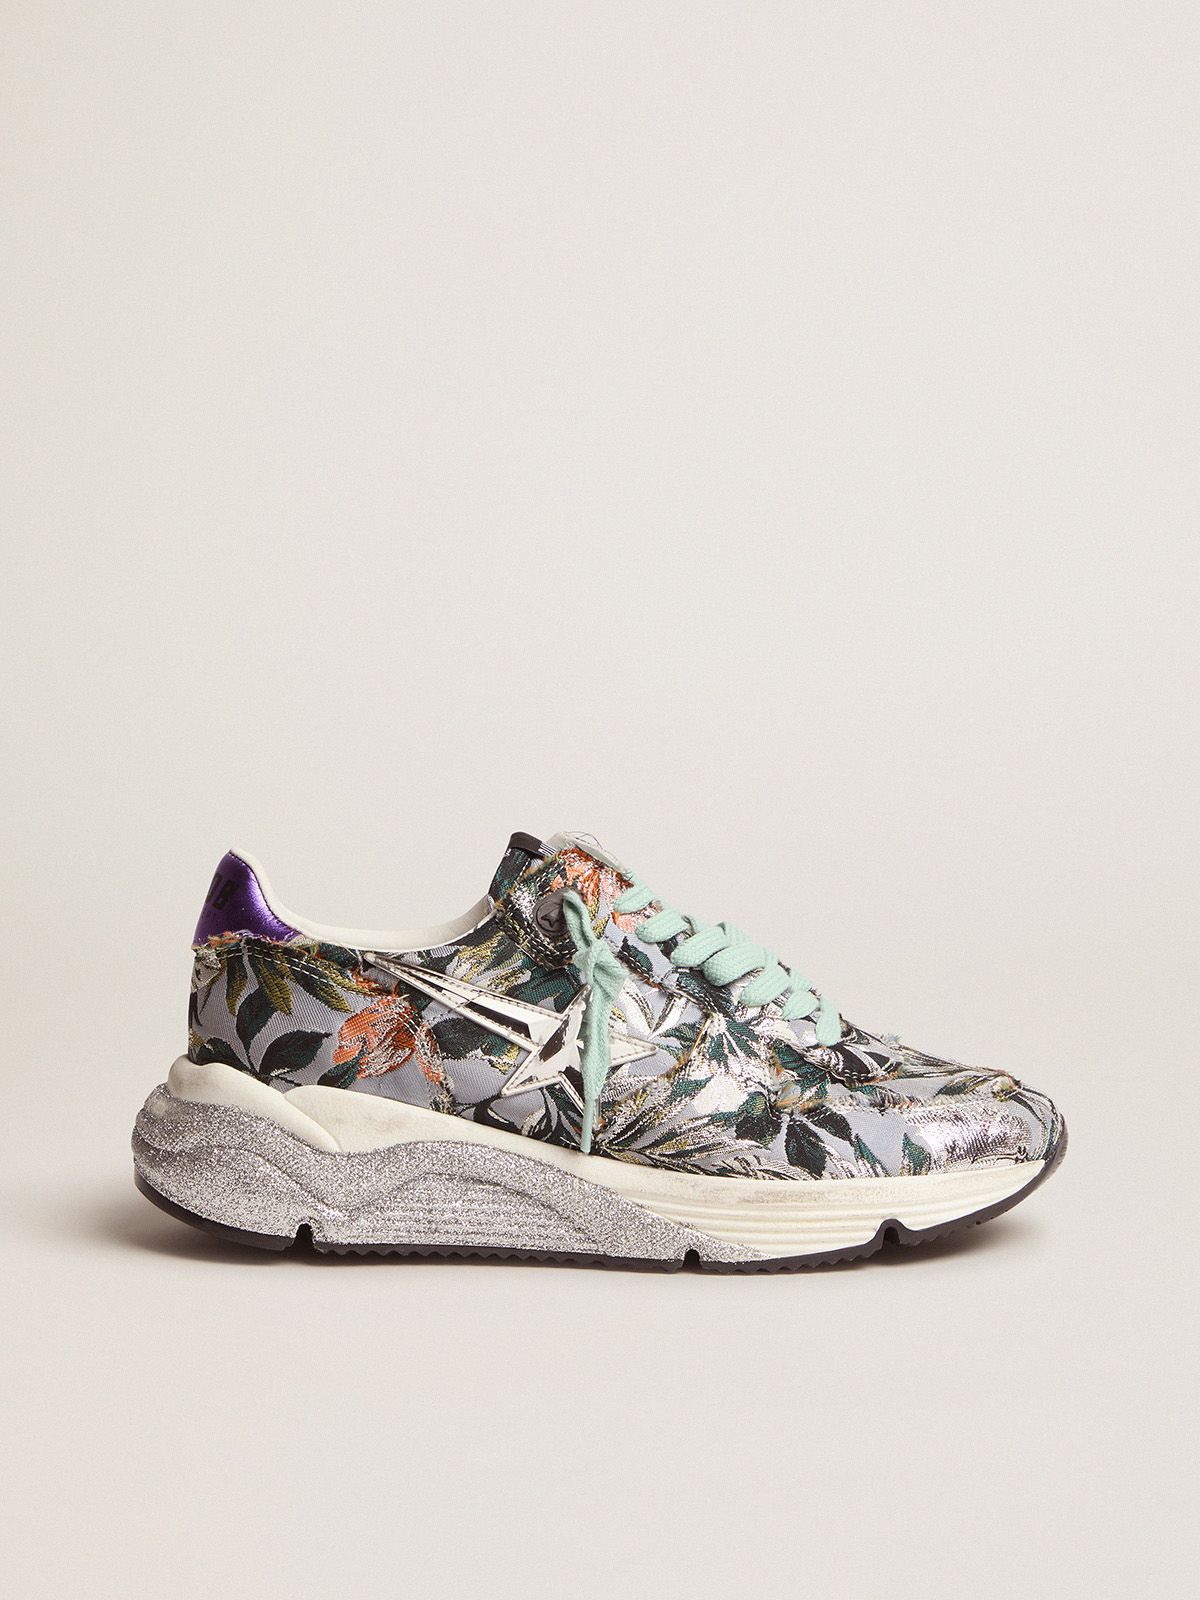 golden goose jacquard Sole floral sneakers upper with Running